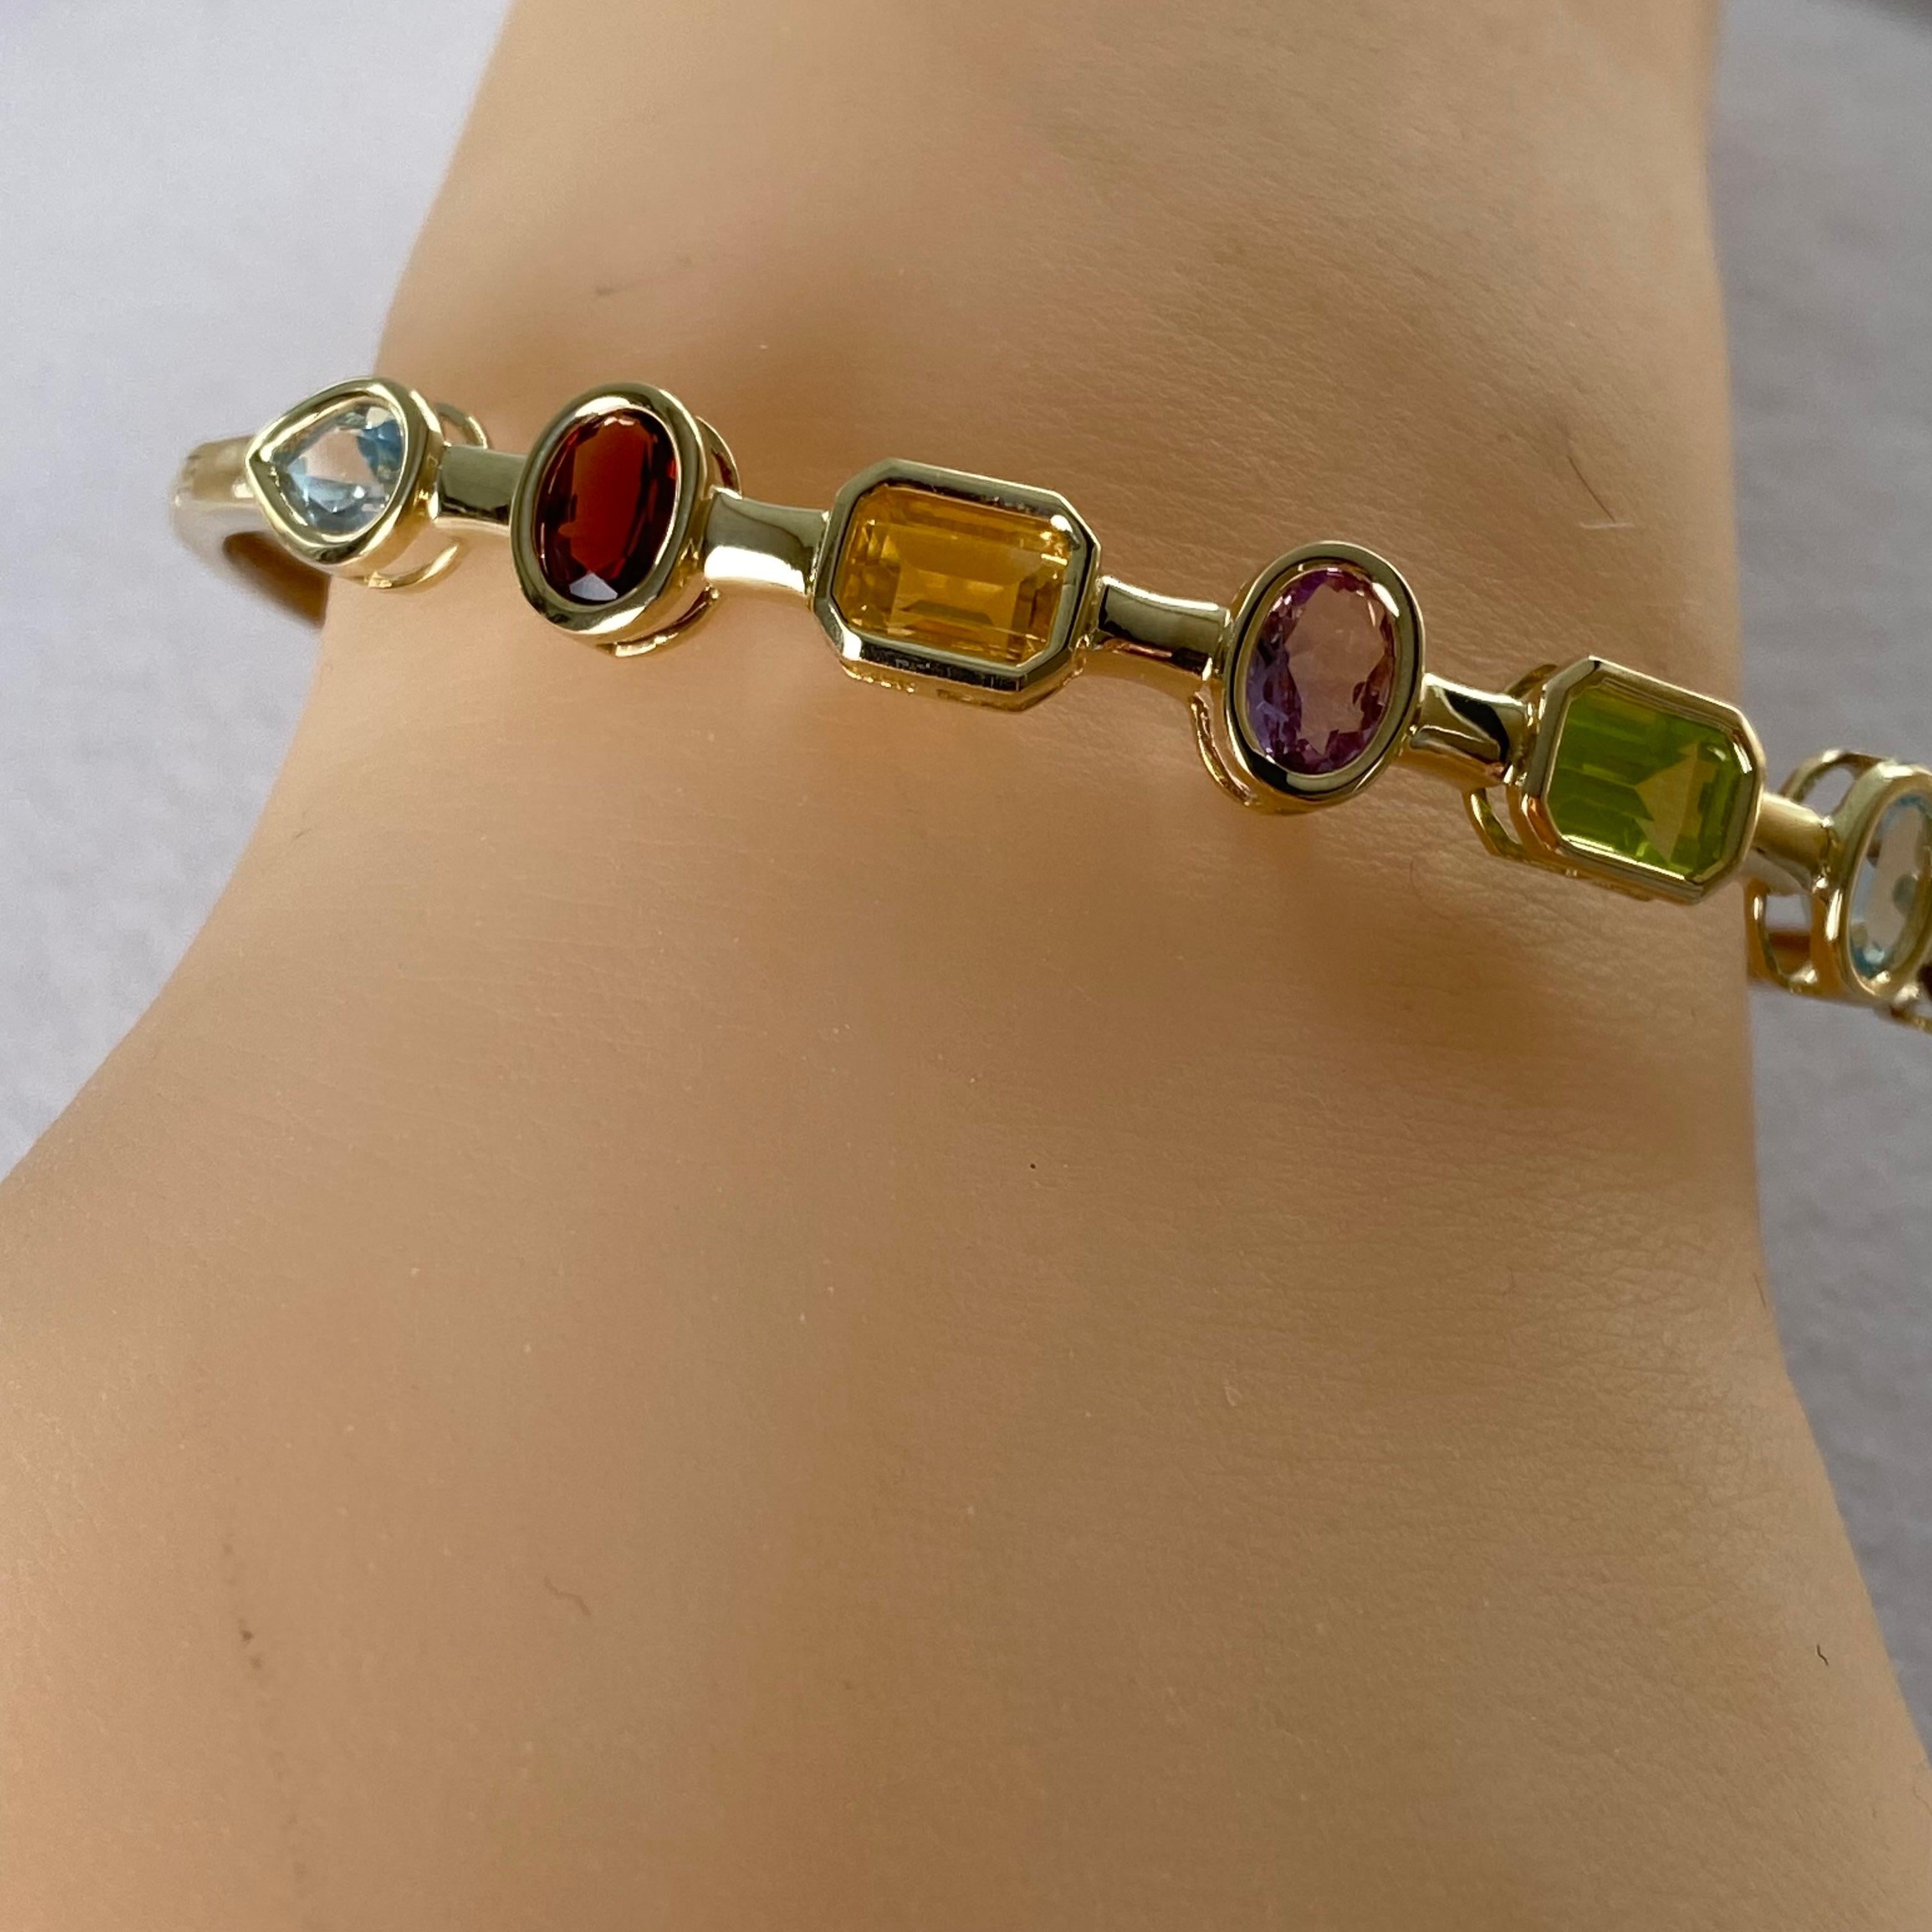 Introducing our exquisite vintage Elliptical Hinged 14 Karat Yellow Gold Bangle Bracelet—a true masterpiece that seamlessly blends elegance and vibrancy. This stunning bracelet features a captivating array of multi-color gemstones, including